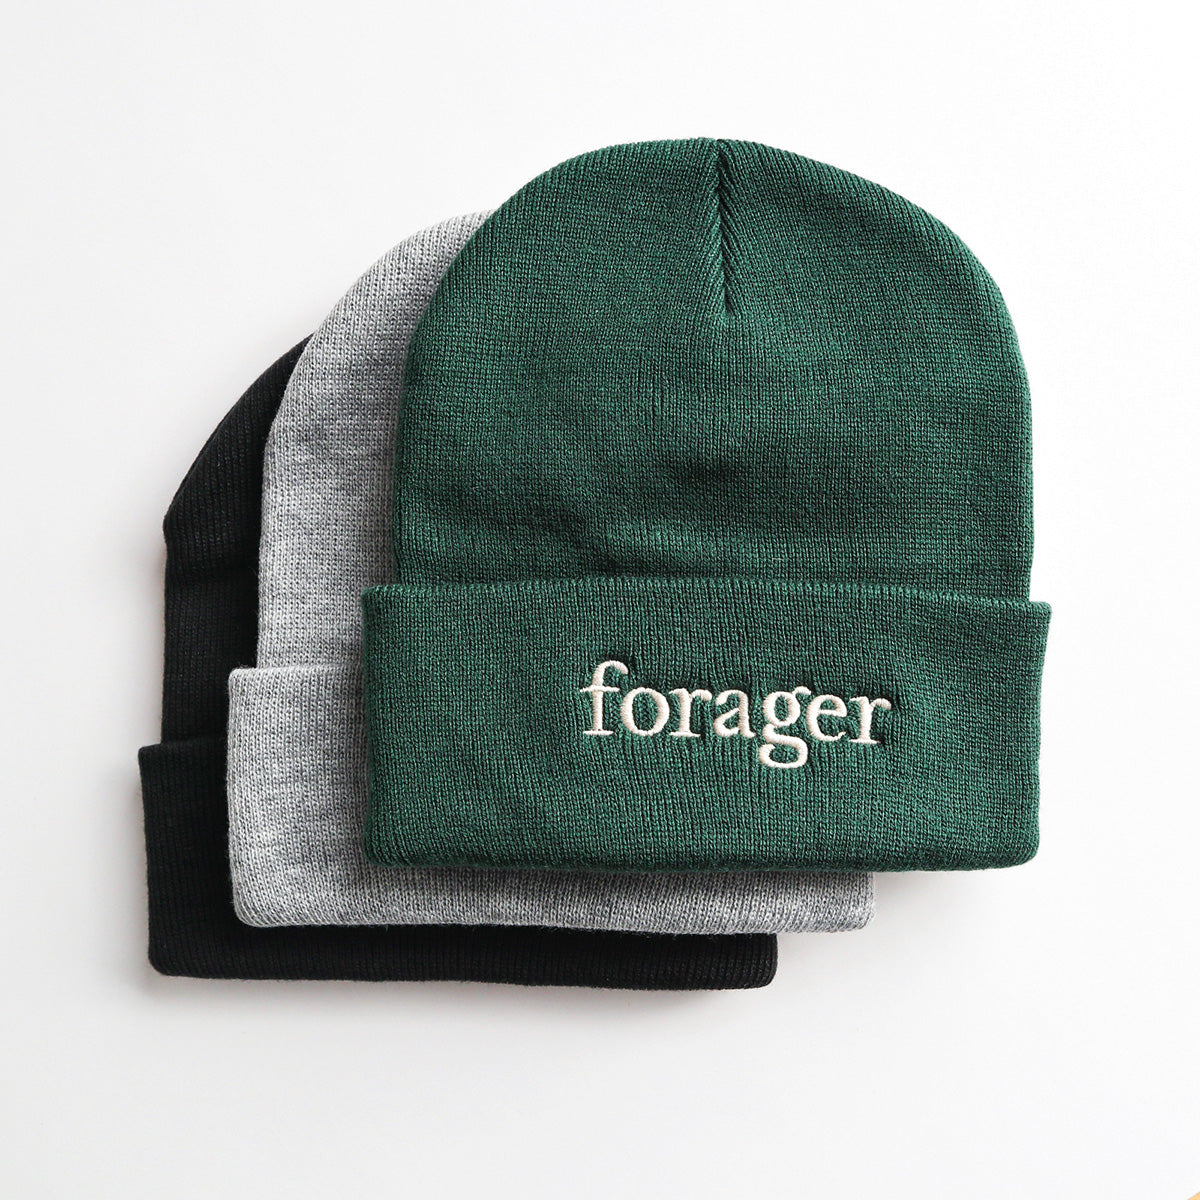 A stack of 3 beanies. The first is green, the second is gray and the last is black.